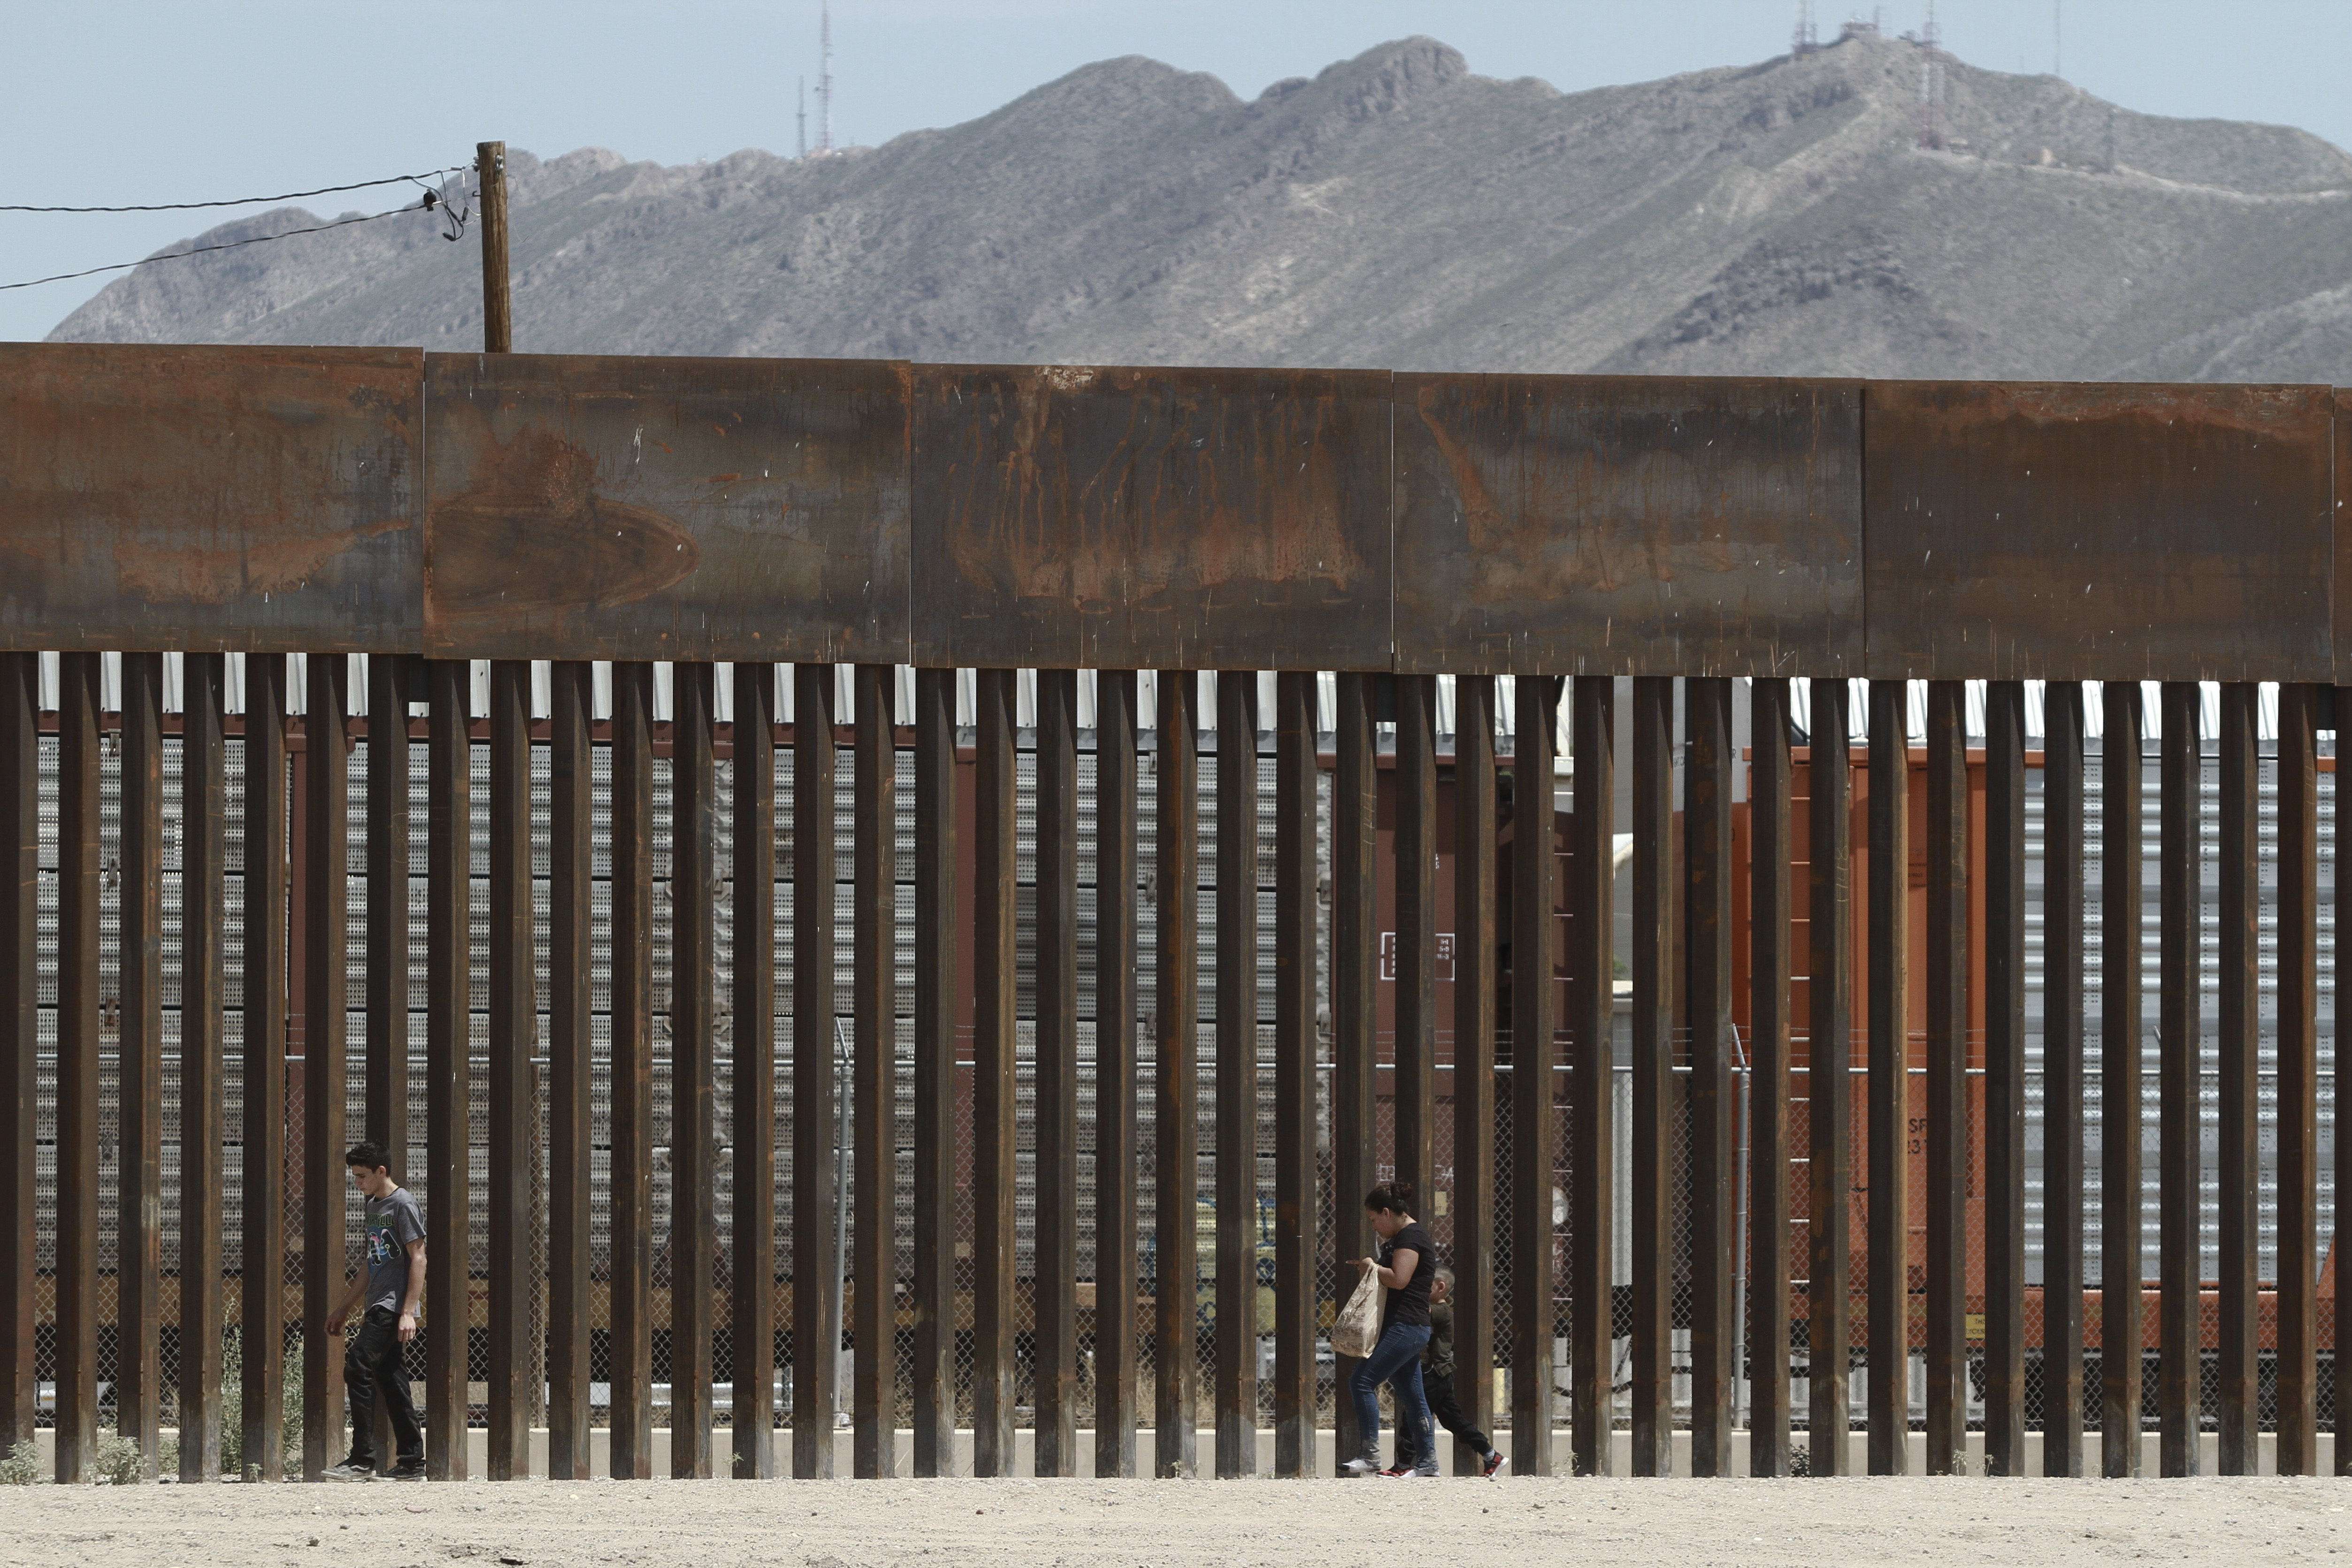 Three migrants who had managed to evade the Mexican National Guard and cross the Rio Grande onto U.S. territory walk along a border wall set back from the geographical border, in El Paso, Texas, as seen from Ciudad Juarez, Mexico, Wednesday, July 17, 2019. Border Patrol agents opened a door in the wall to escort them into a waiting patrol car. It was not clear whether the migrants, already on U.S. soil, would still be able to submit a claim for asylum under a new U.S. policy that went into effect Tuesday.(AP Photo/Christian Chavez)